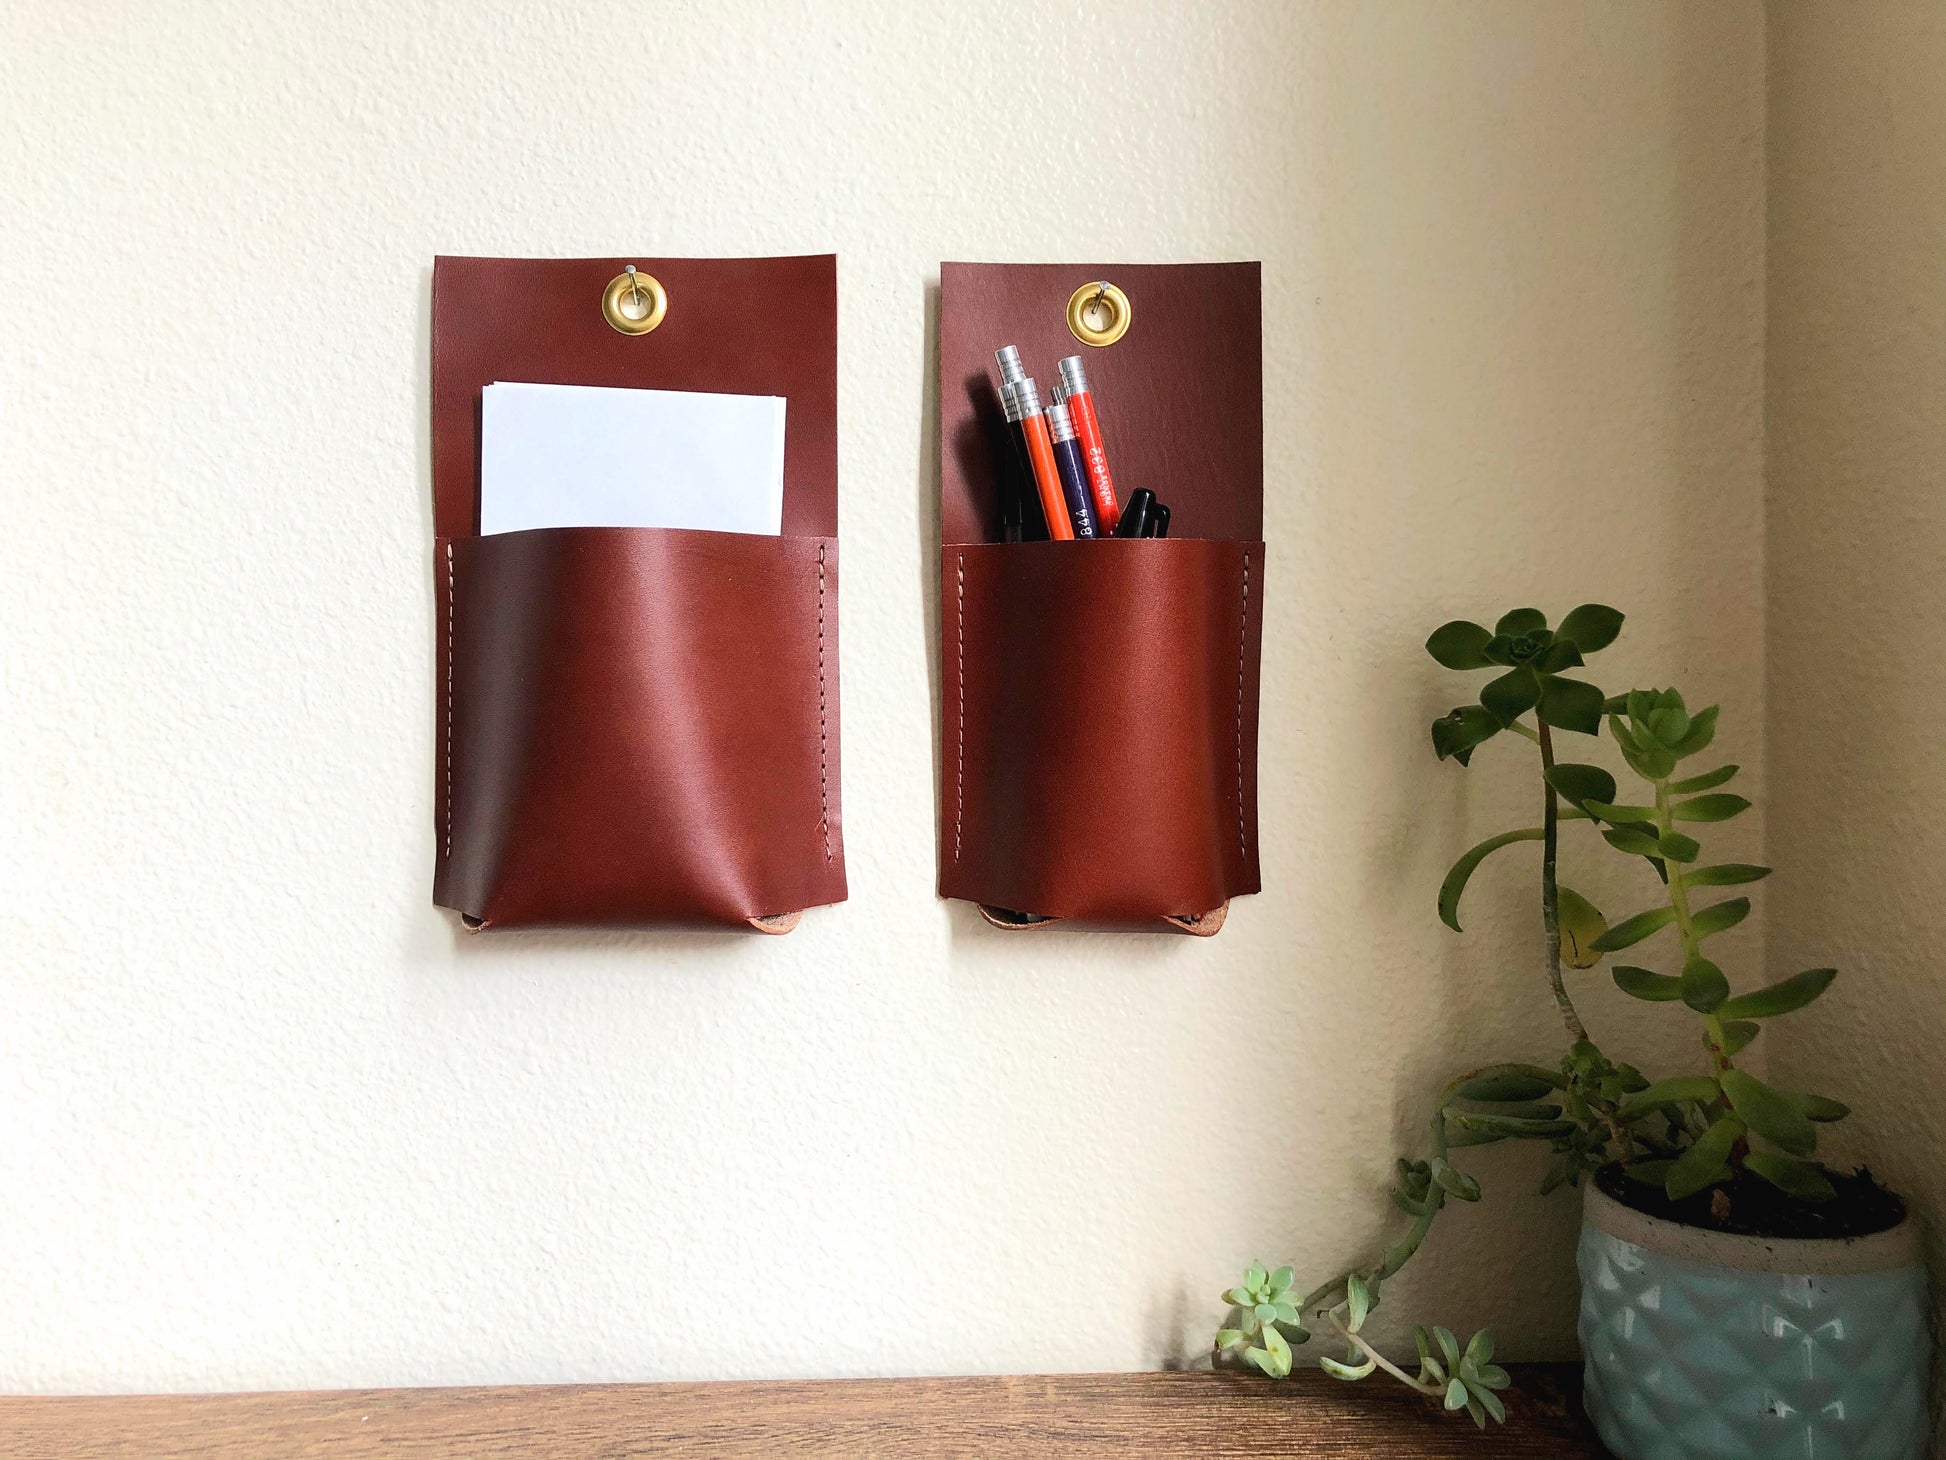 Two brown leather wall pockets hang together holding pencils and paper.